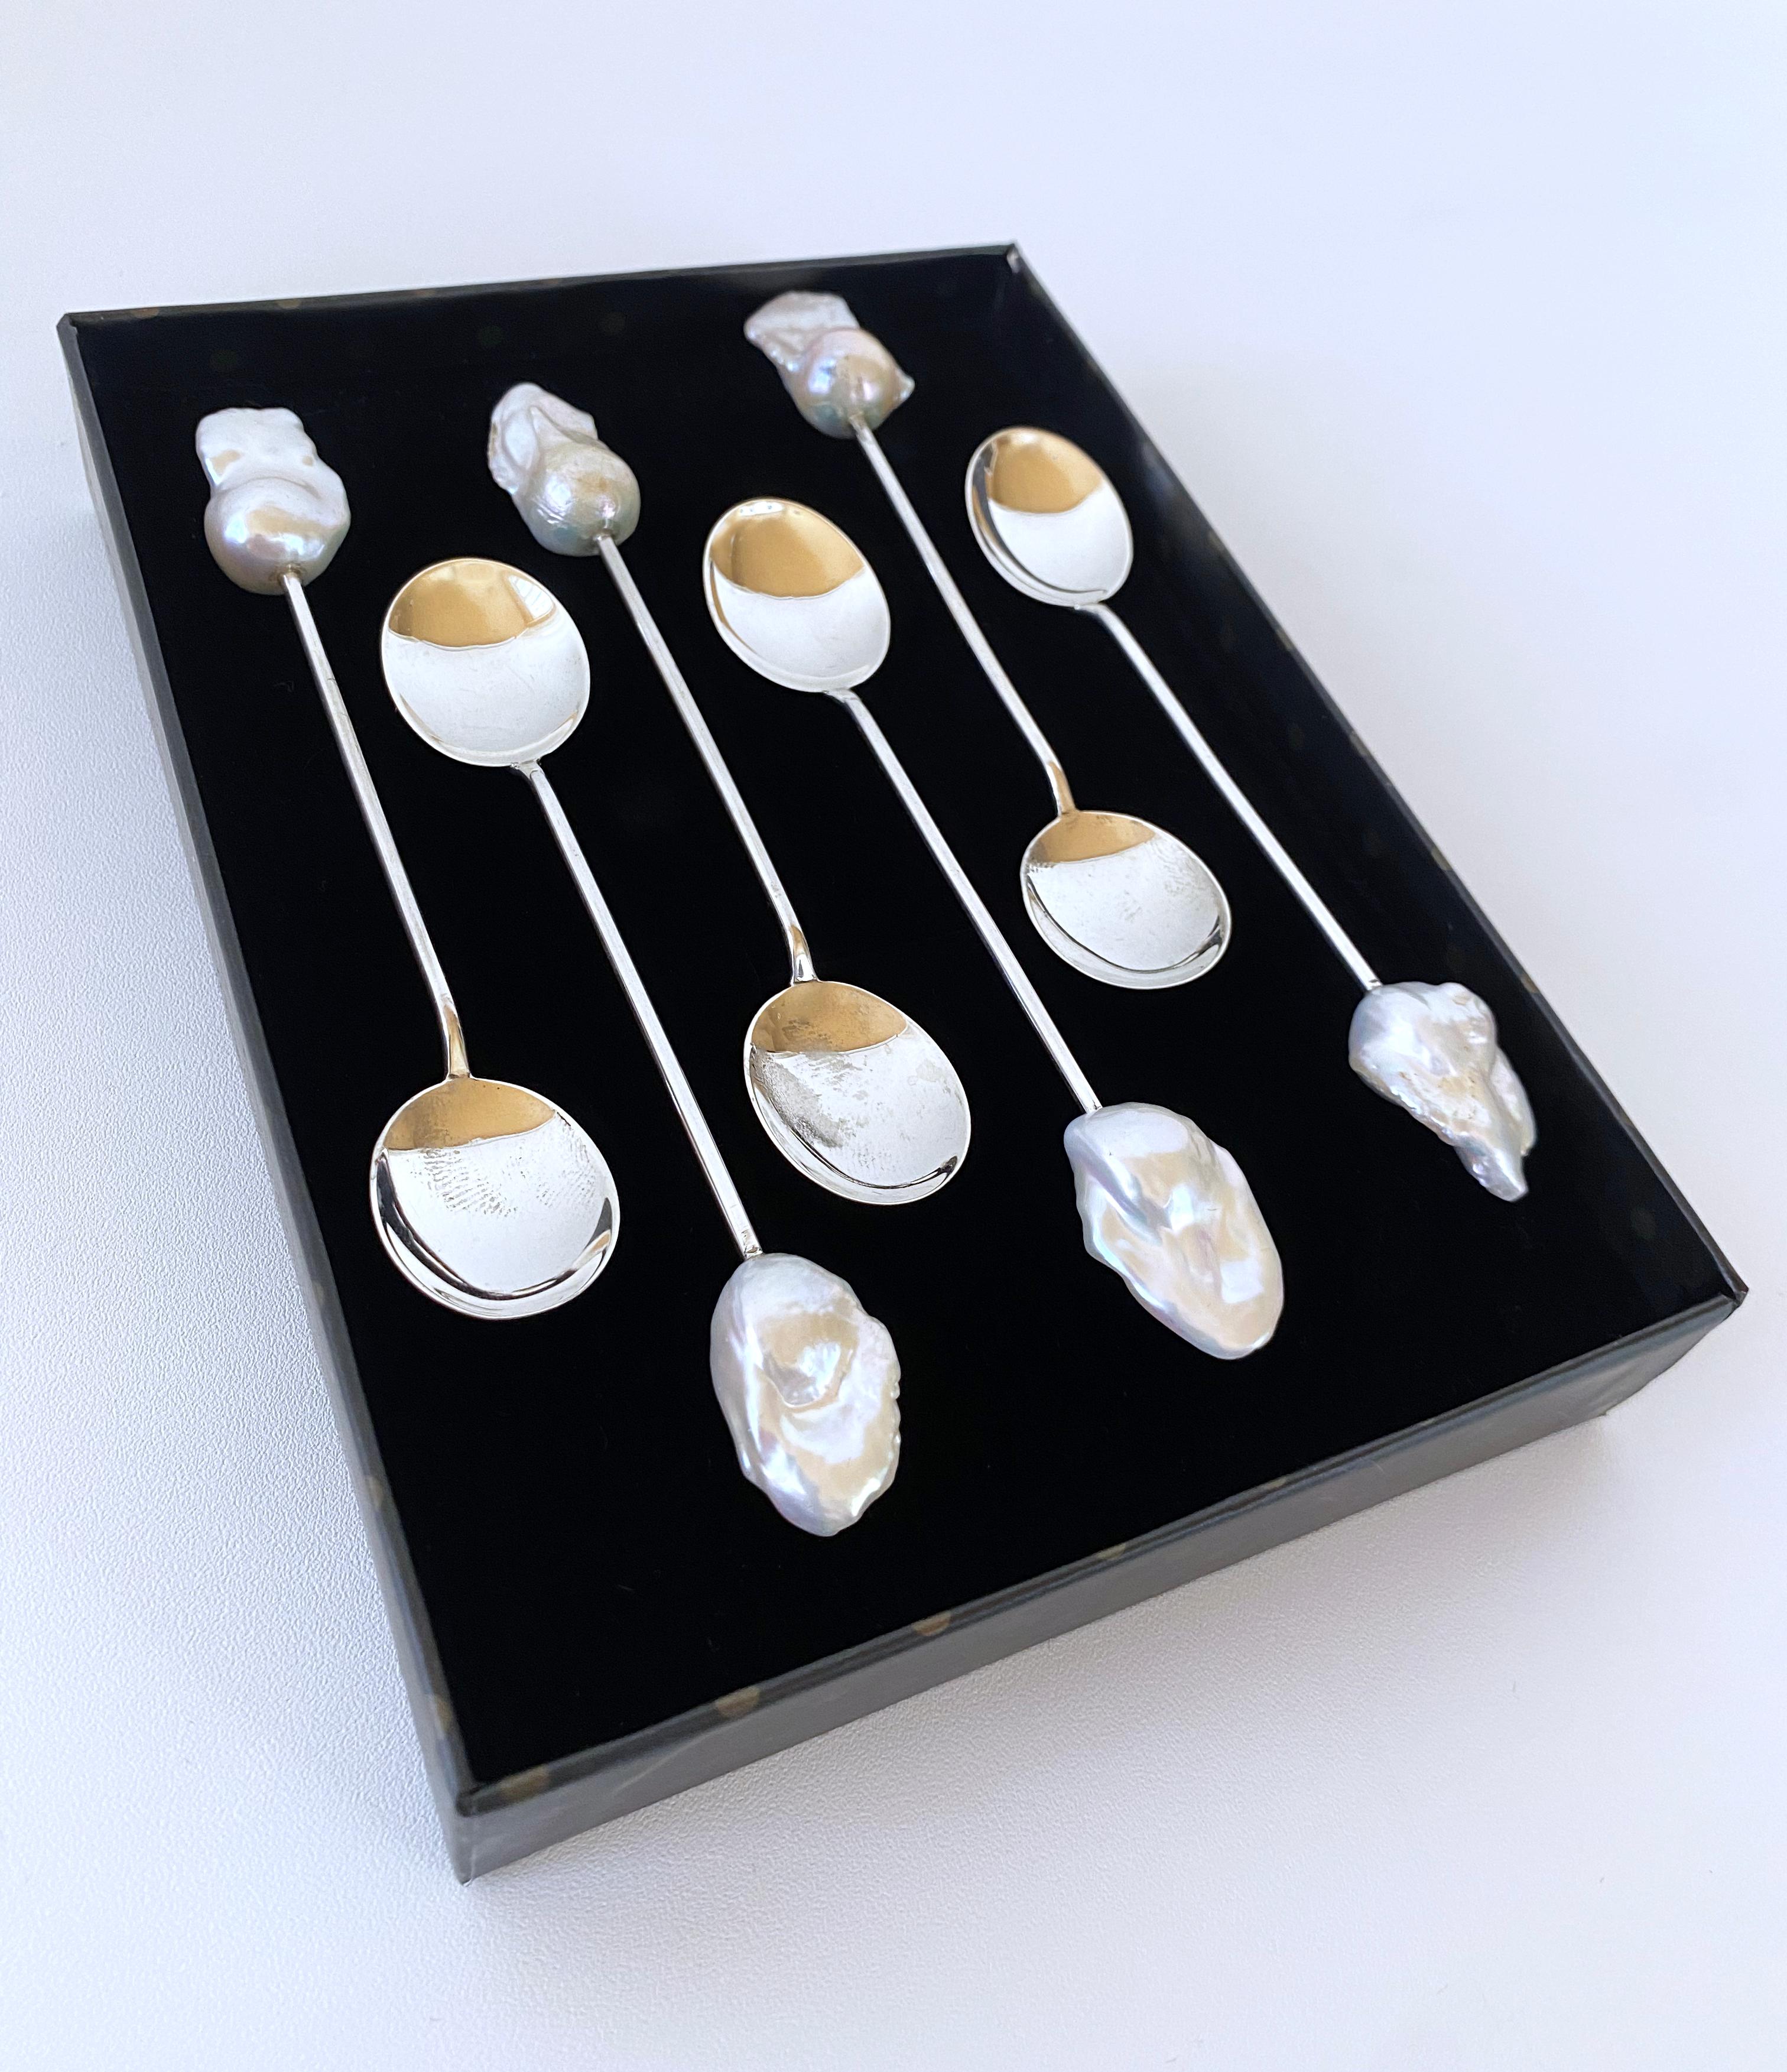 Ultimate One of A Kind Antique Spoon set from Marina J. This set of six spoons features Vintage Sterling Silver and are all stamped on the bottom. Measuring 4.5 inches each, gorgeous iridescent Baroque Pearls with vivid Luster adorn the ends of all